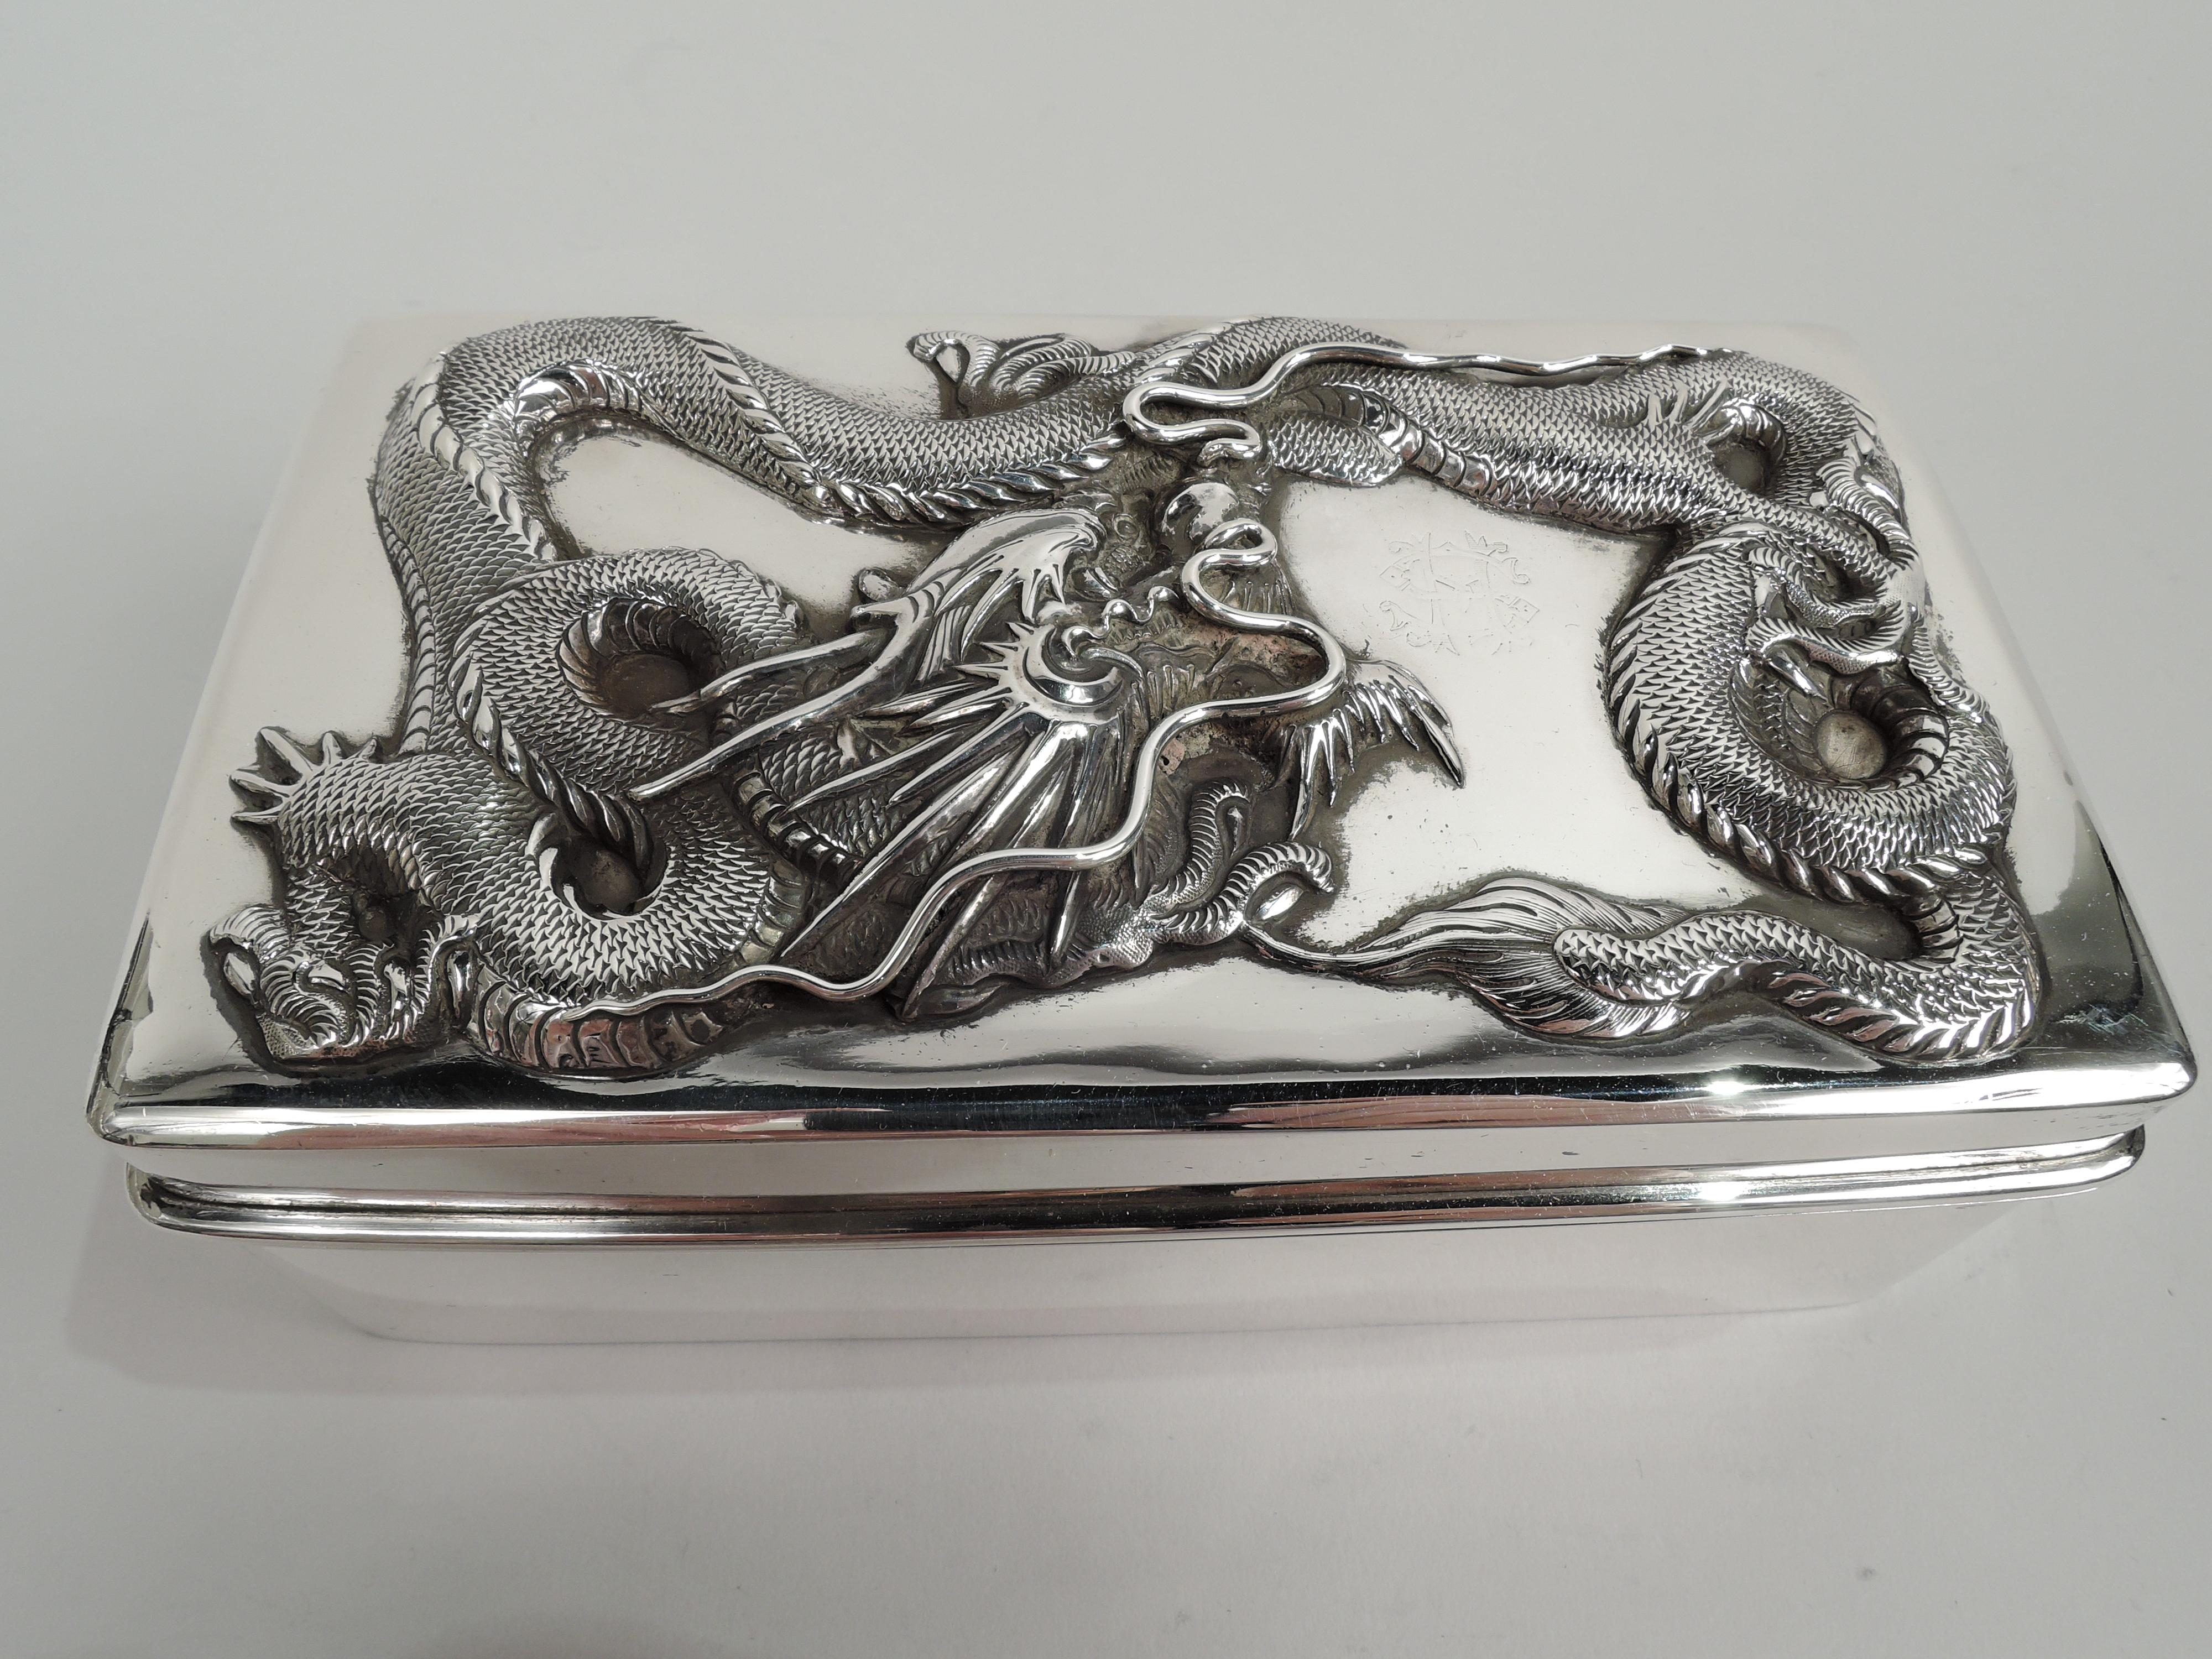 Turn-of-the-century Chinese export silver box. Rectangular with straight sides and curved corners. Cover hinged and raised with wraparound overhanging rim. On cover top is applied dragon with spiked head, sharp talons, and wraparound scaly